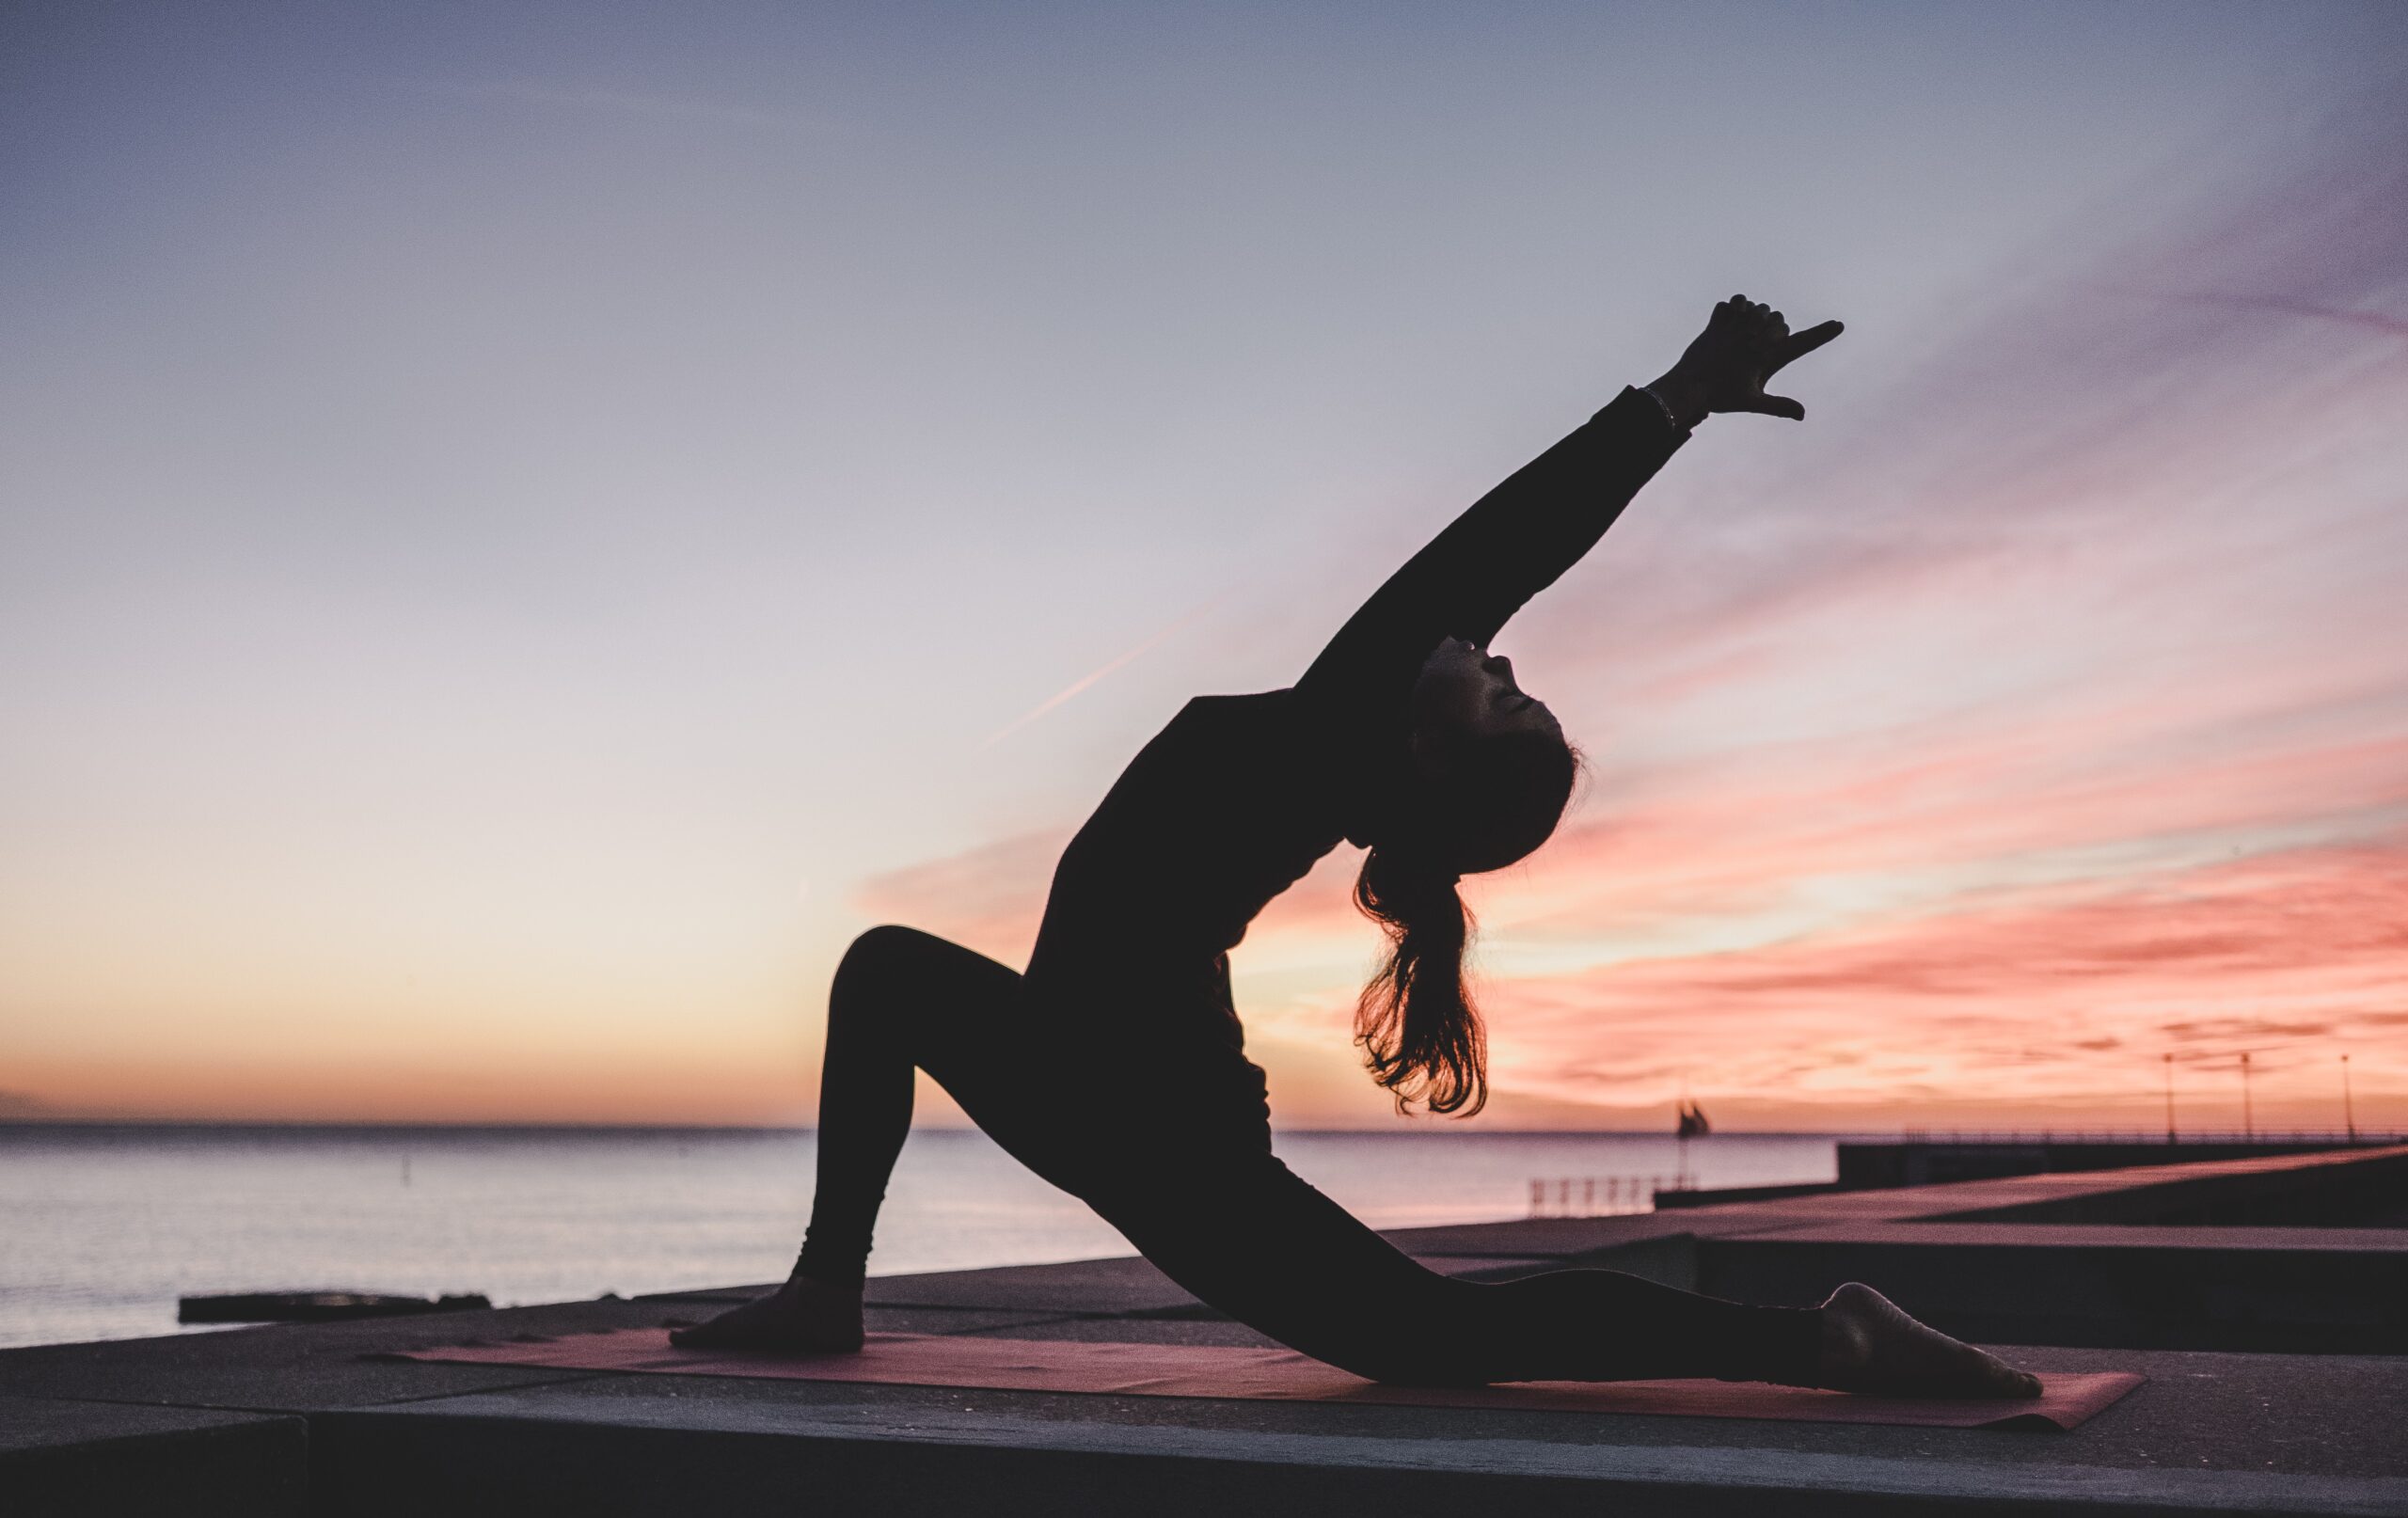 Silhouette of woman doing yoga pose in front of purple and pink sunset.